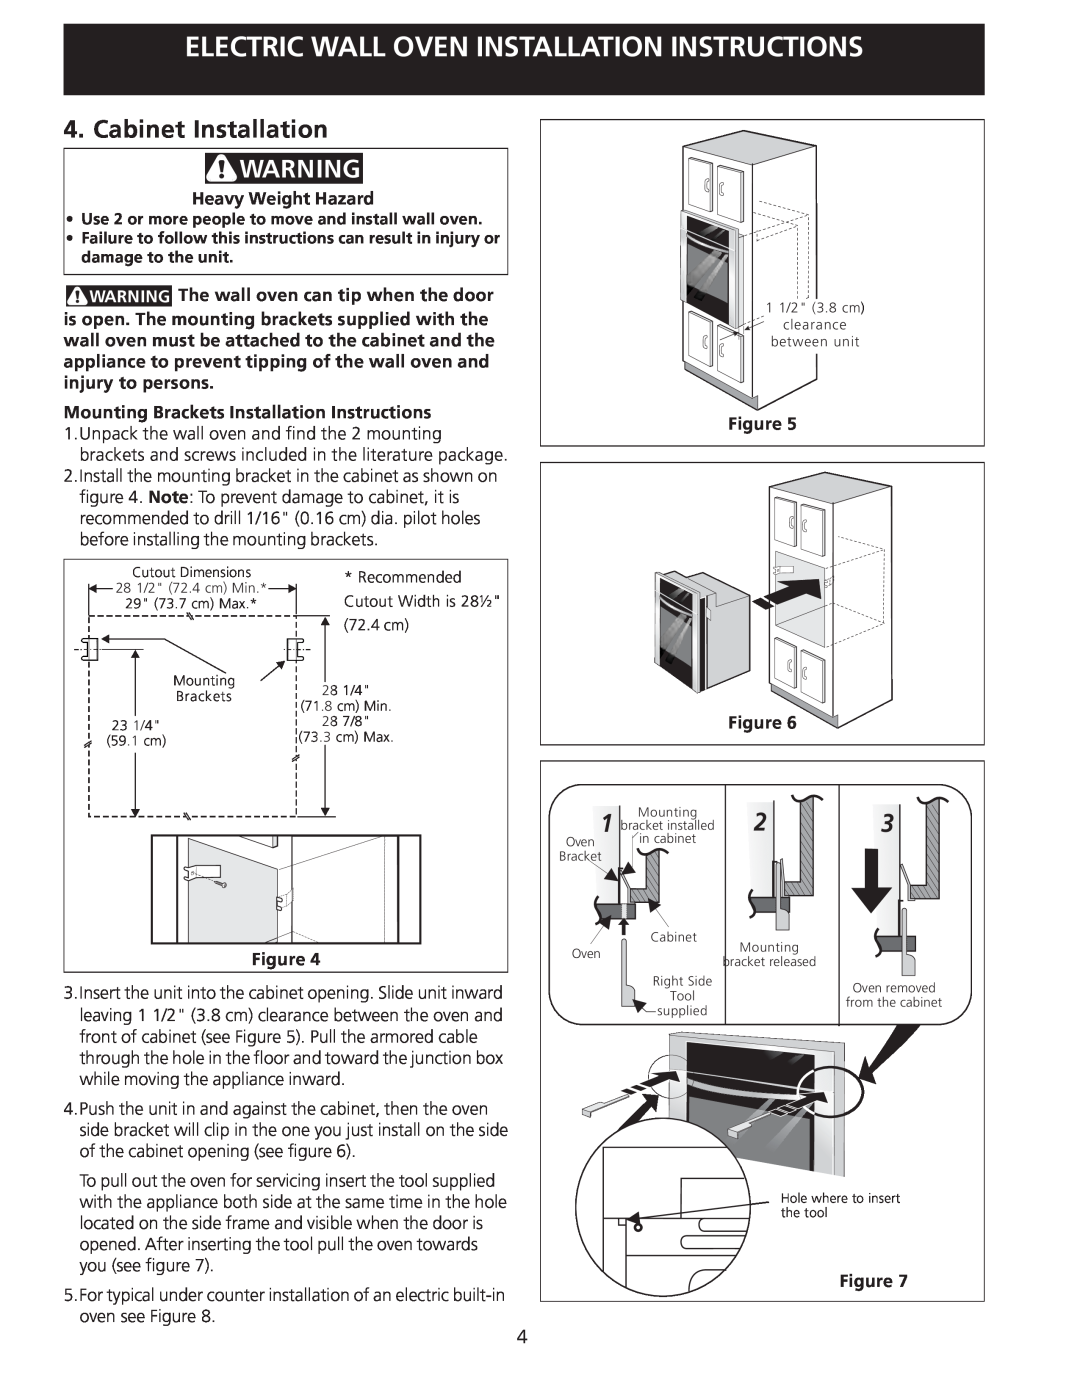 Electrolux 30" Wall Oven dimensions Cabinet Installation, Electric Wall Oven Installation Instructions 